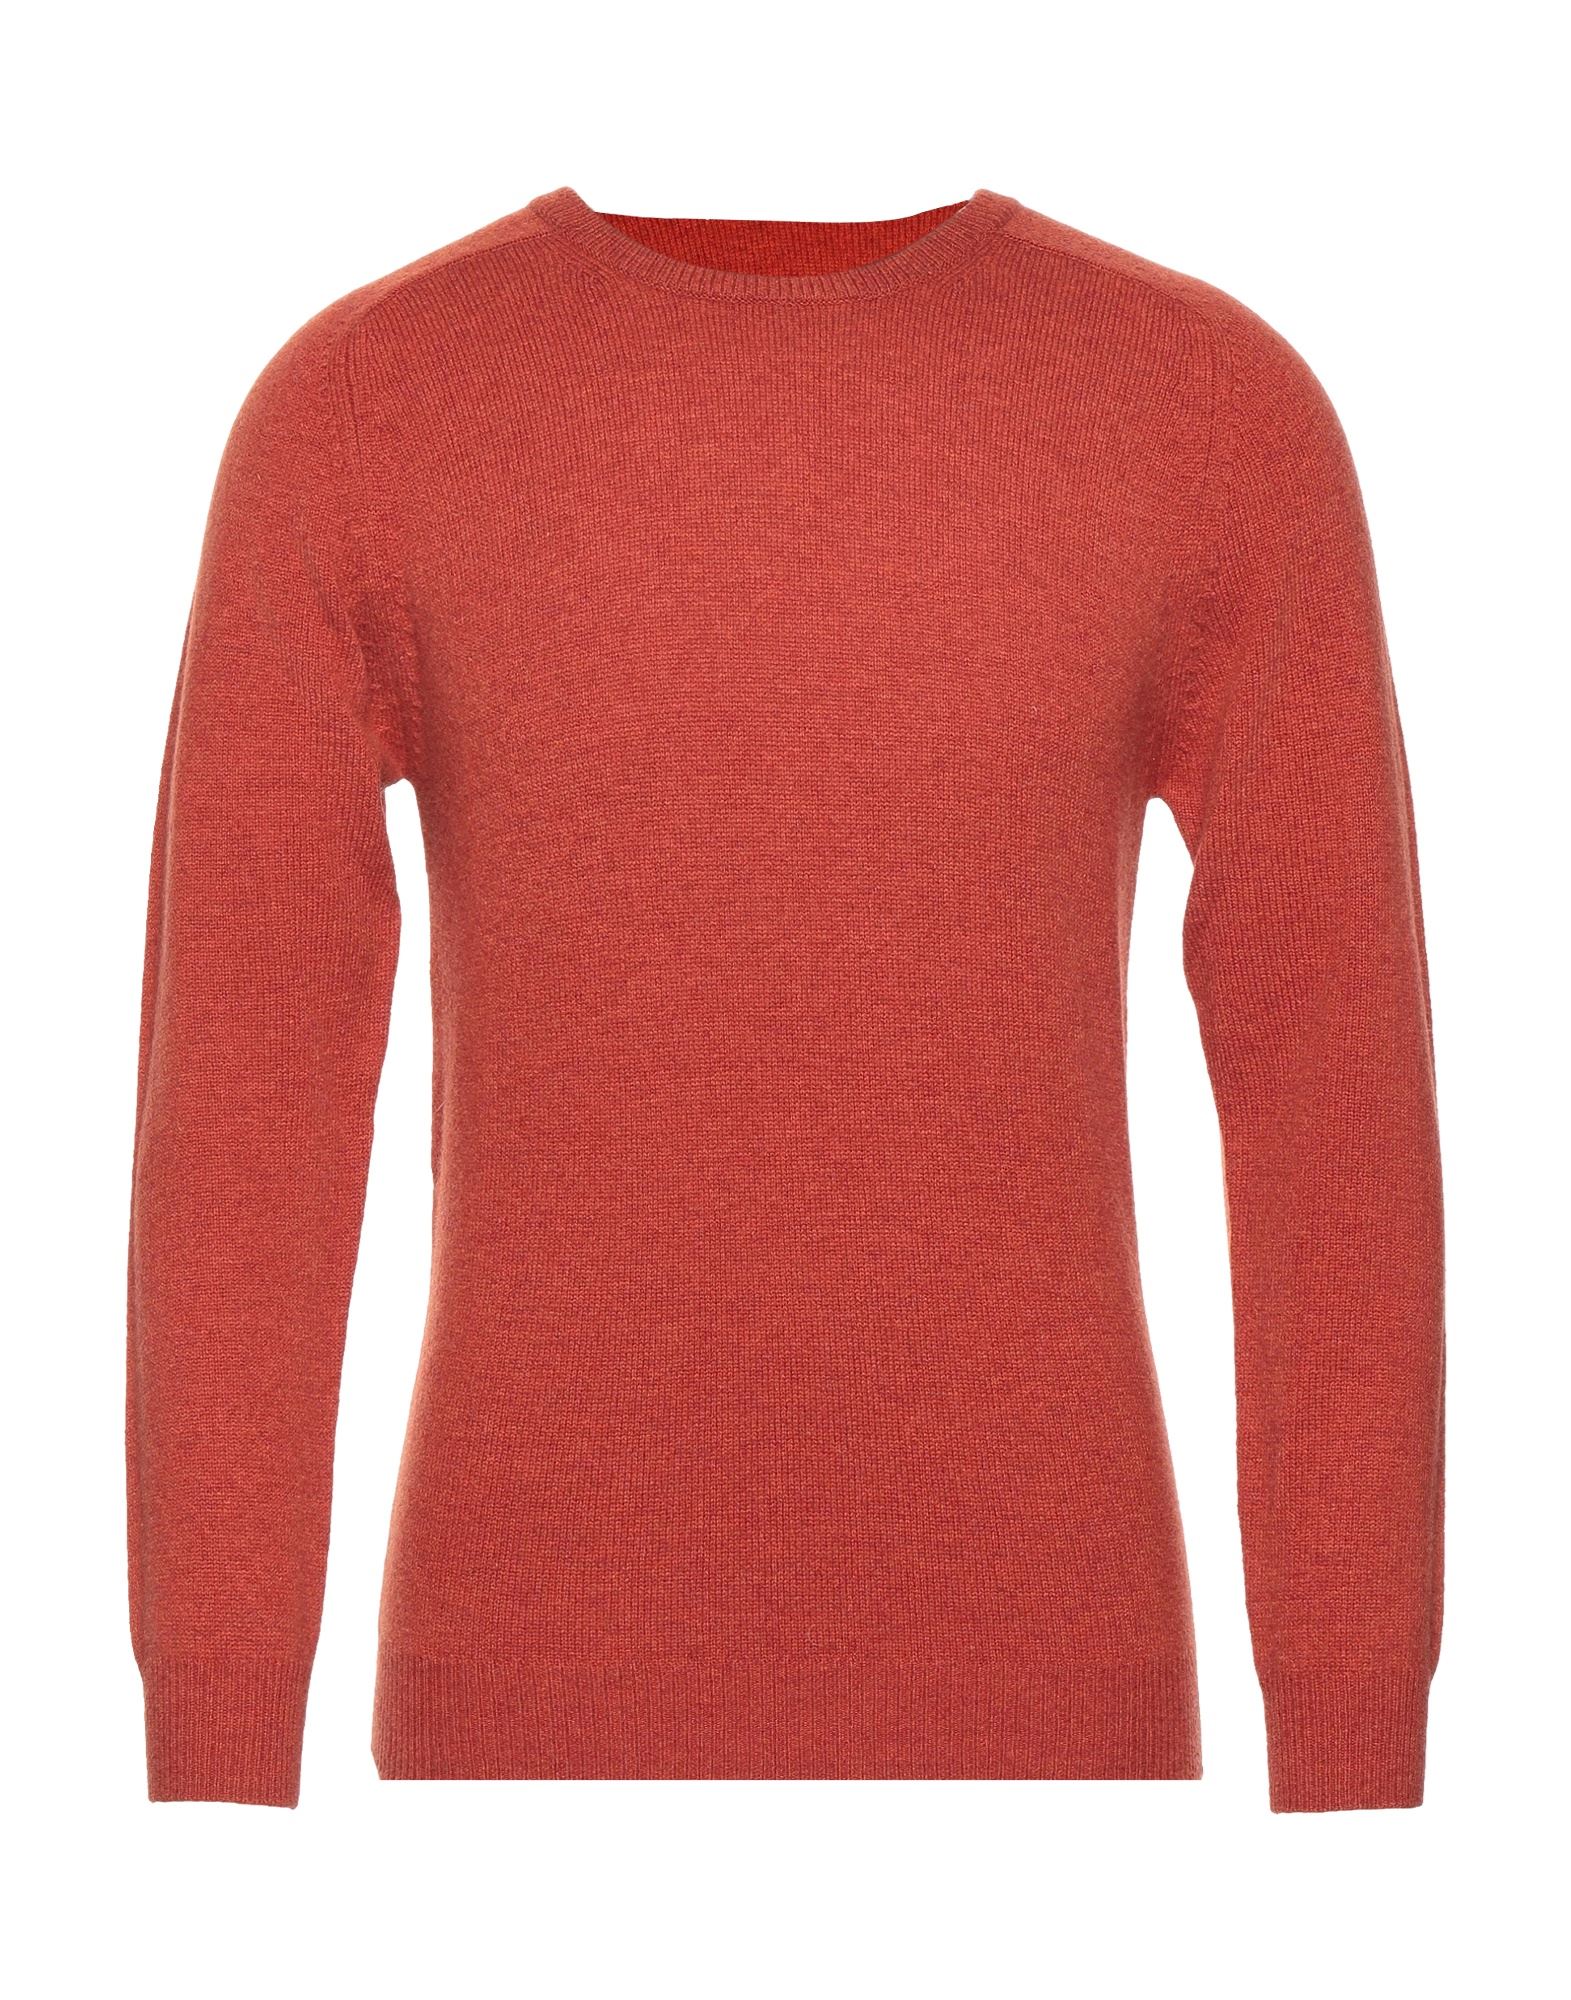 Alan Paine Sweaters In Rust